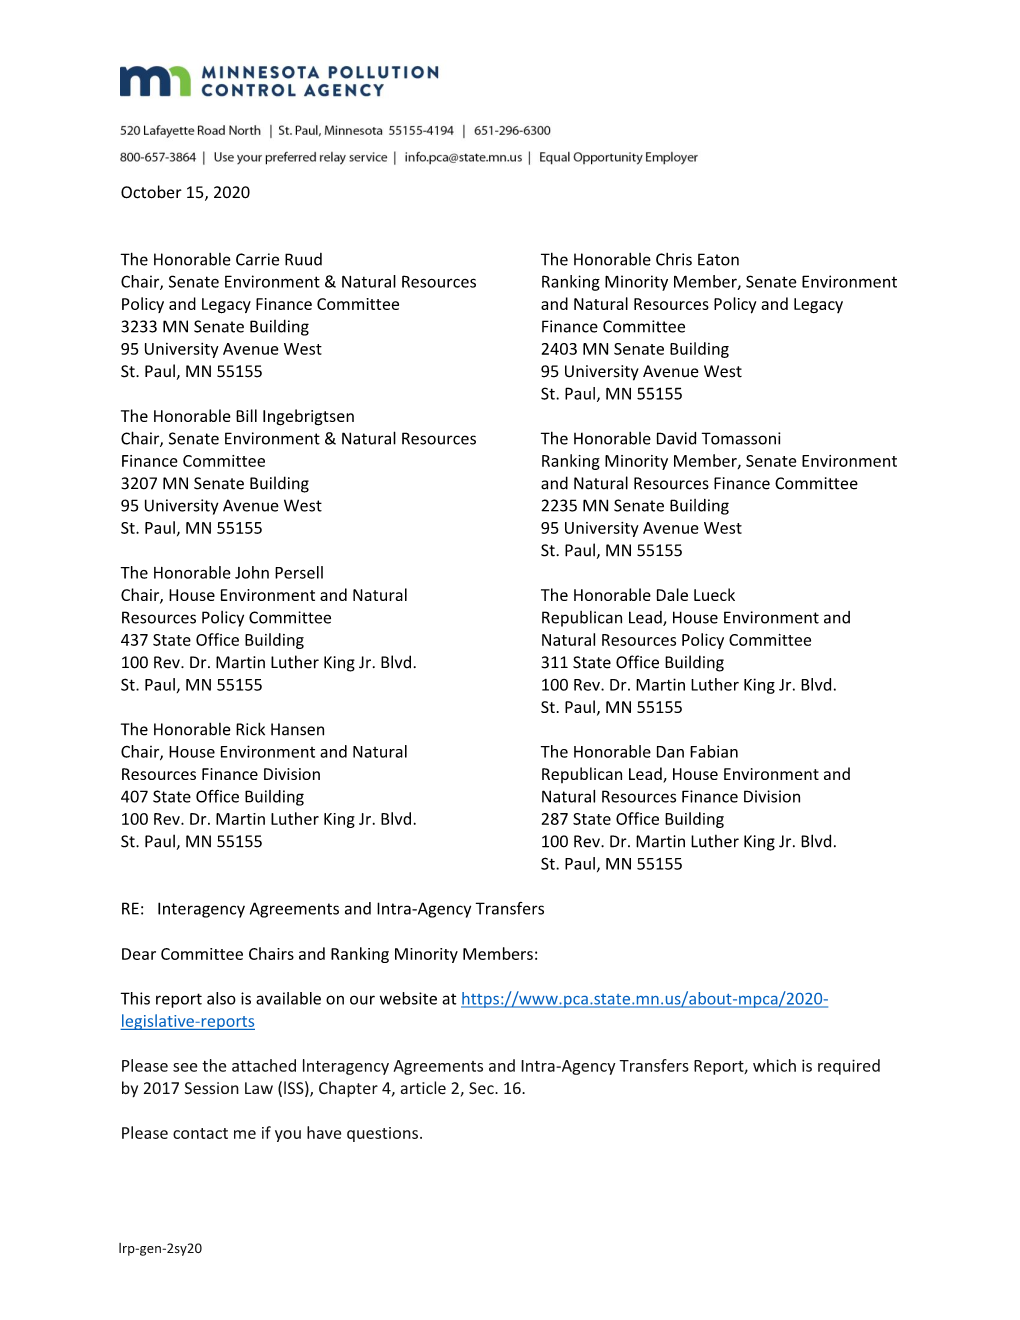 Lrp-Gen-2Sy20 Committee Chairs and Ranking Minority Members Page 2 October 15, 2020